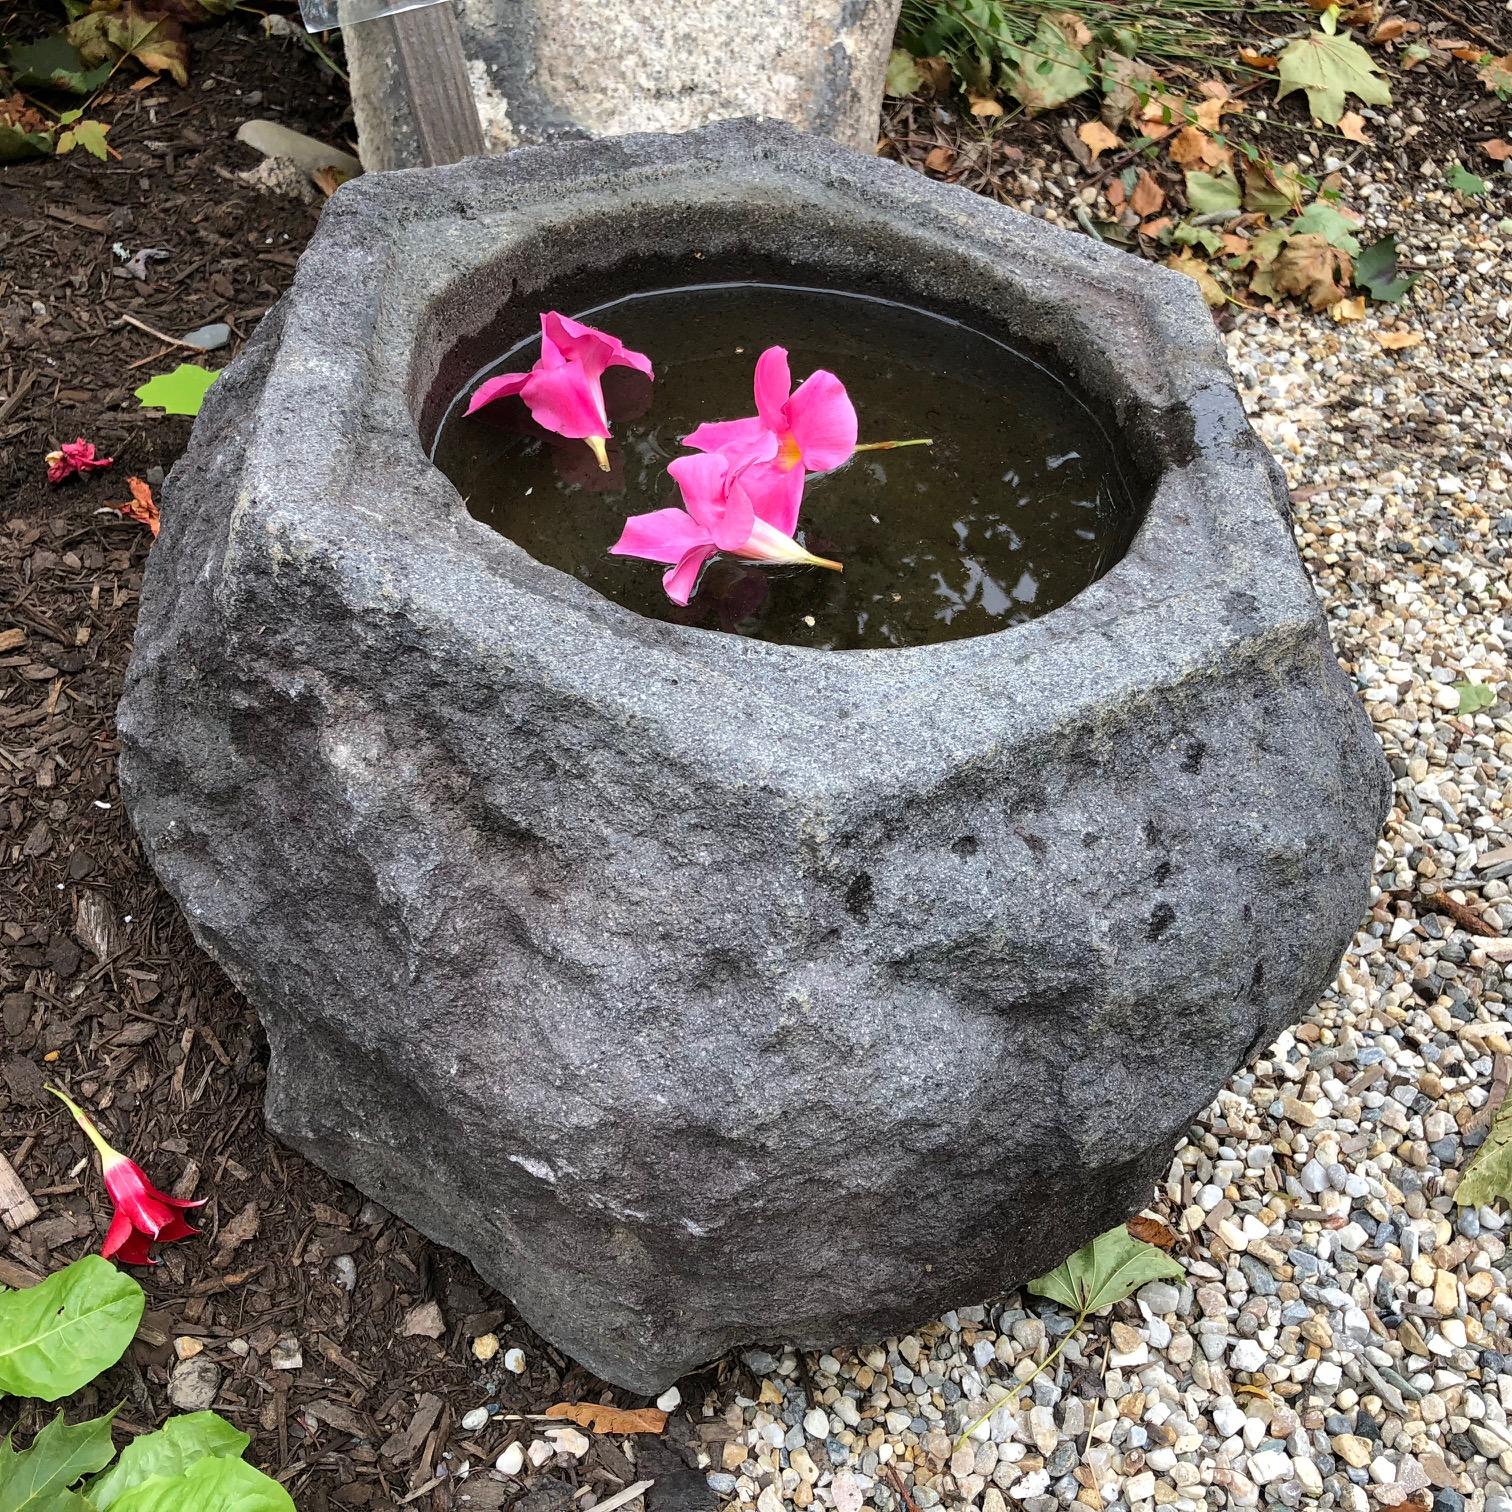 Japan, a handsome and unique antique natural shaped stone water basin planter -tsukubai- created from a natural mountain boulder and sourced from a decades old garden. Its hexagonal top has been carefully hand carved to reveal even more surface